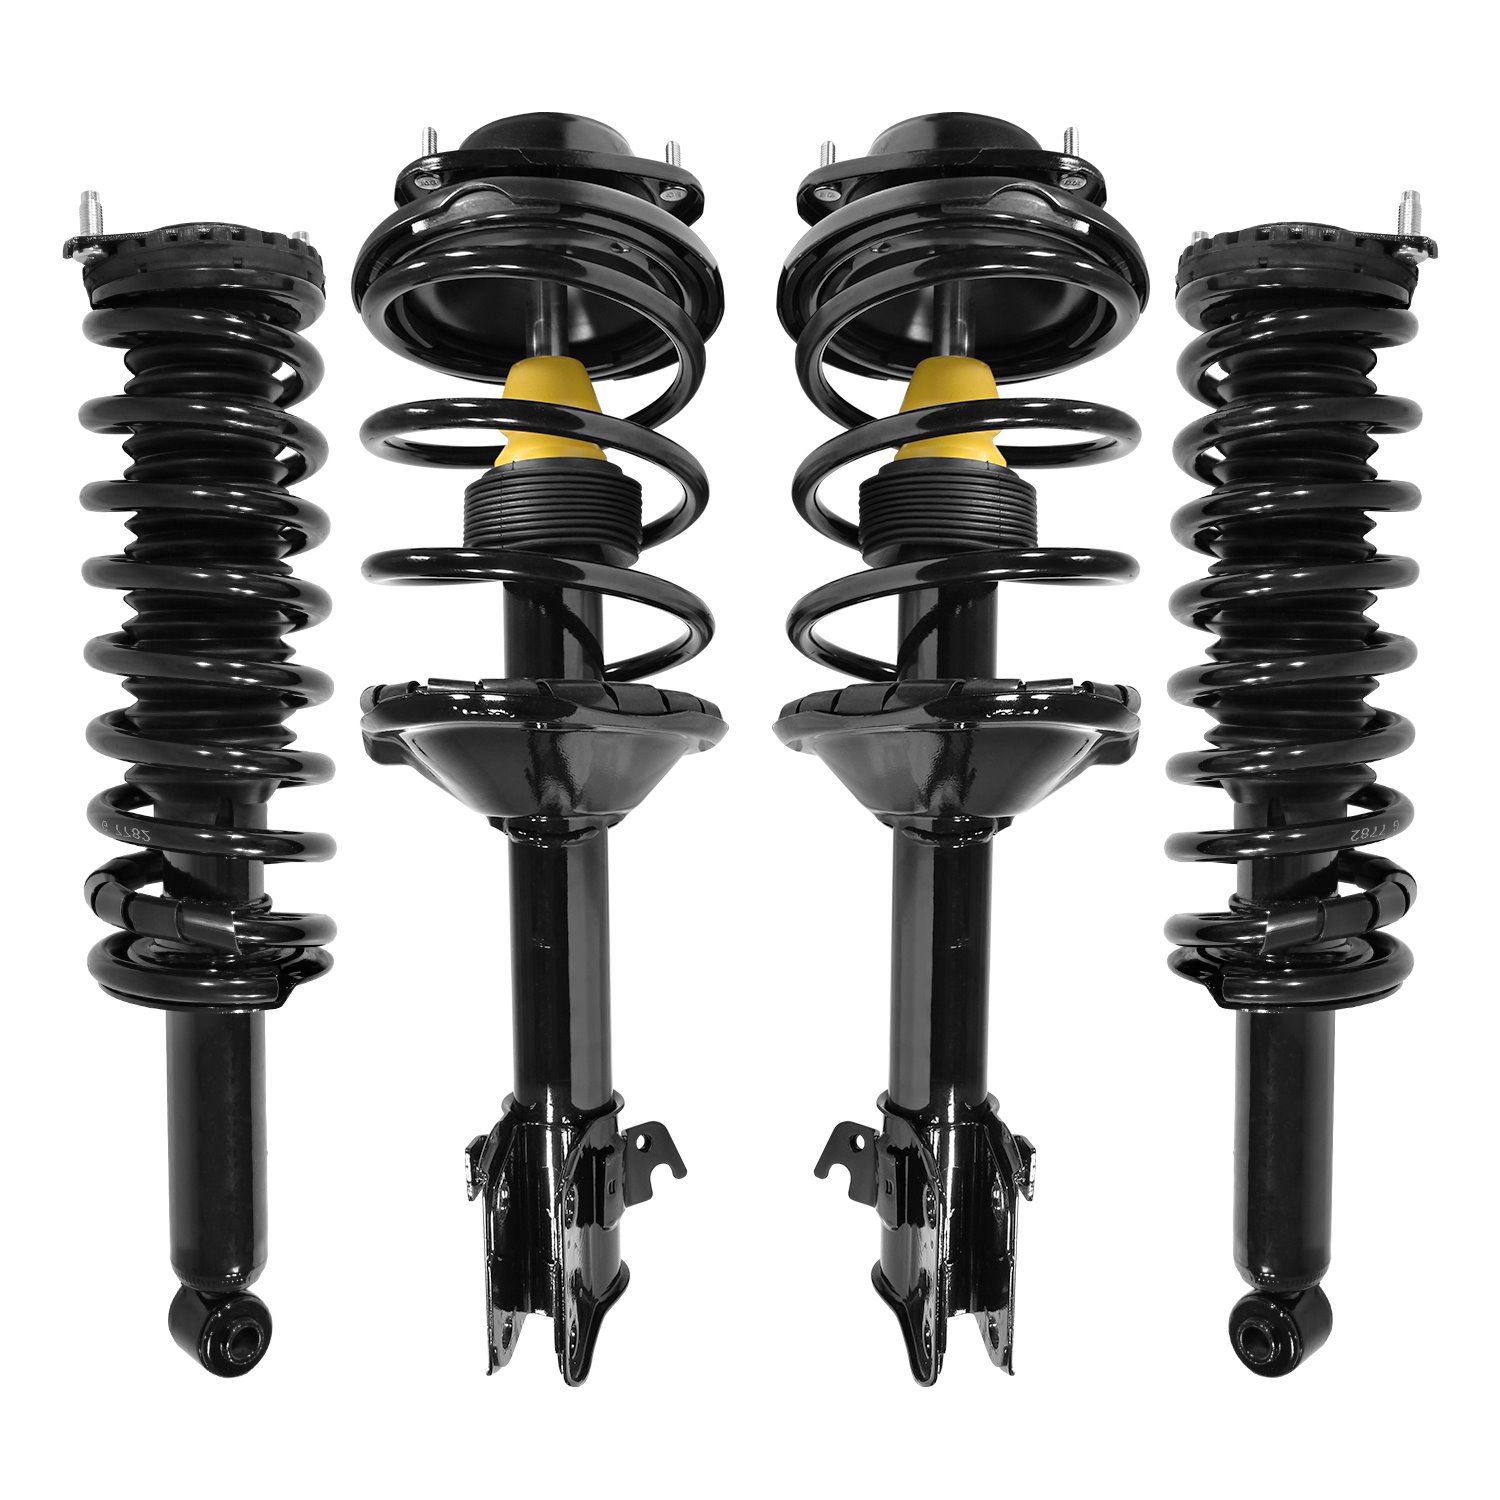 4-11853-15870-001 Front & Rear Suspension Strut & Coil Spring Assembly Kit Fits Select Subaru Outback